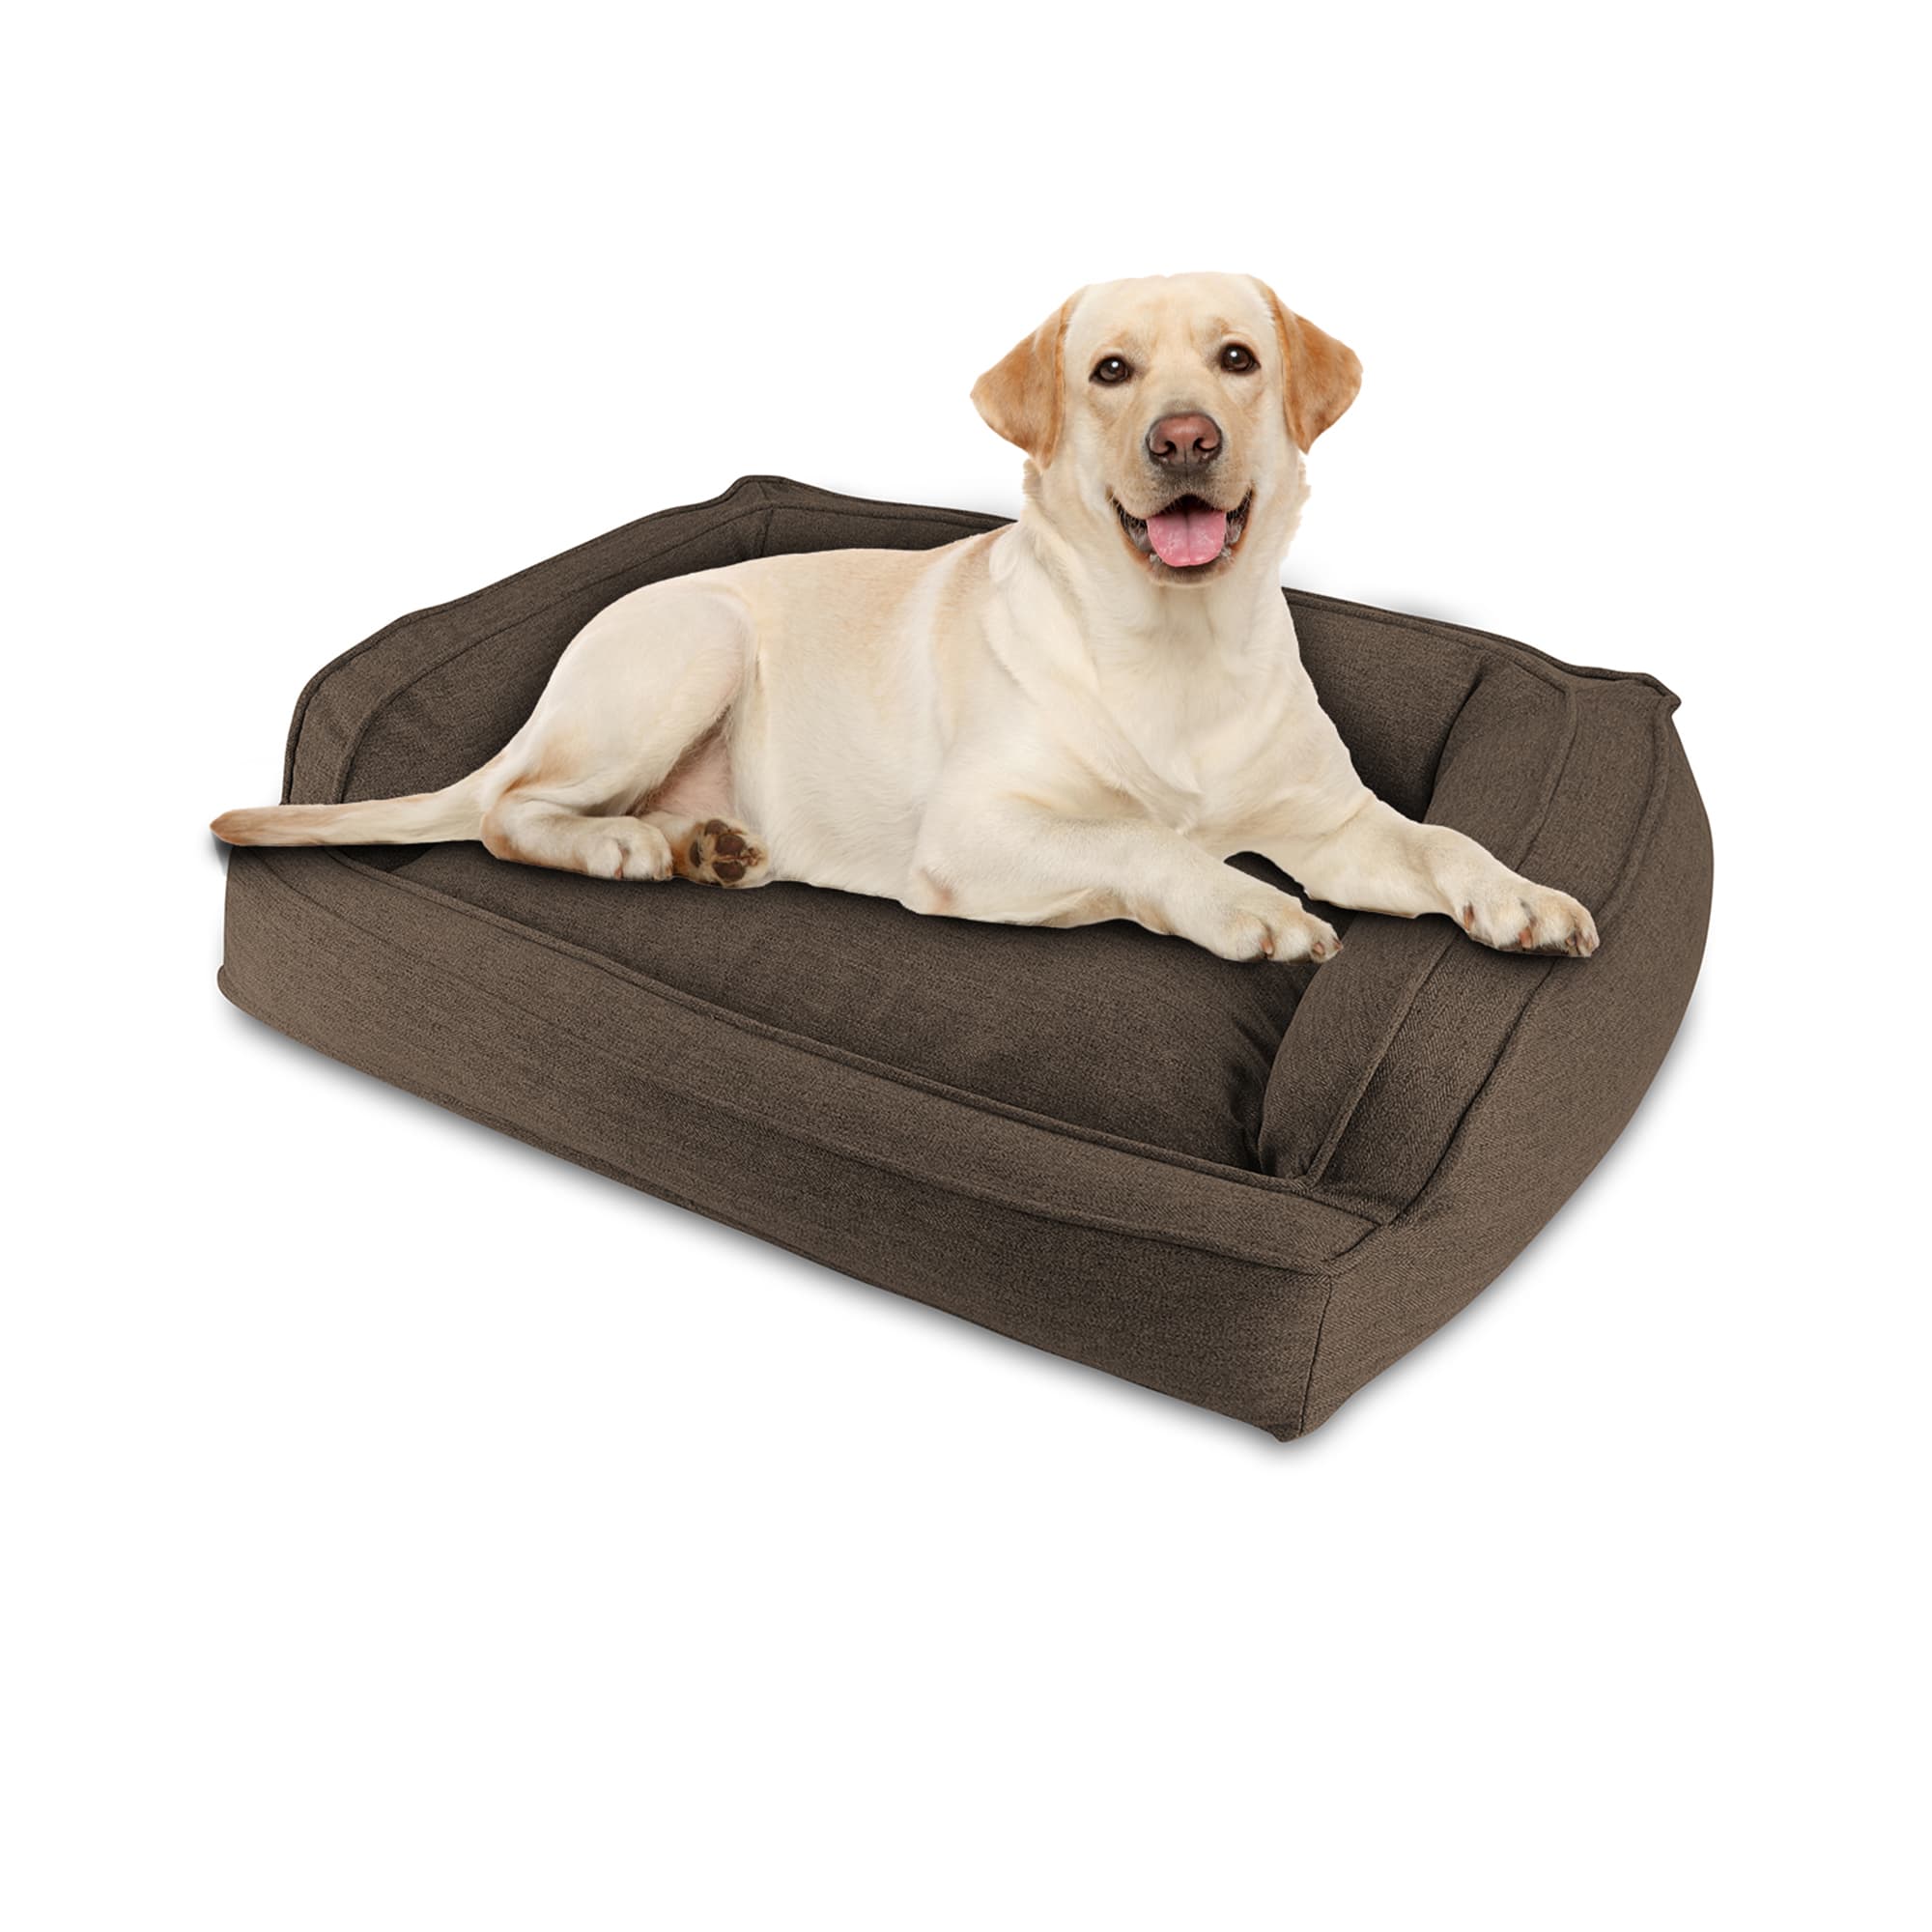 Photos - Bed & Furniture Canine Creations Brown Sofa Dog Bed, 41" L X 33" W X 9" H 